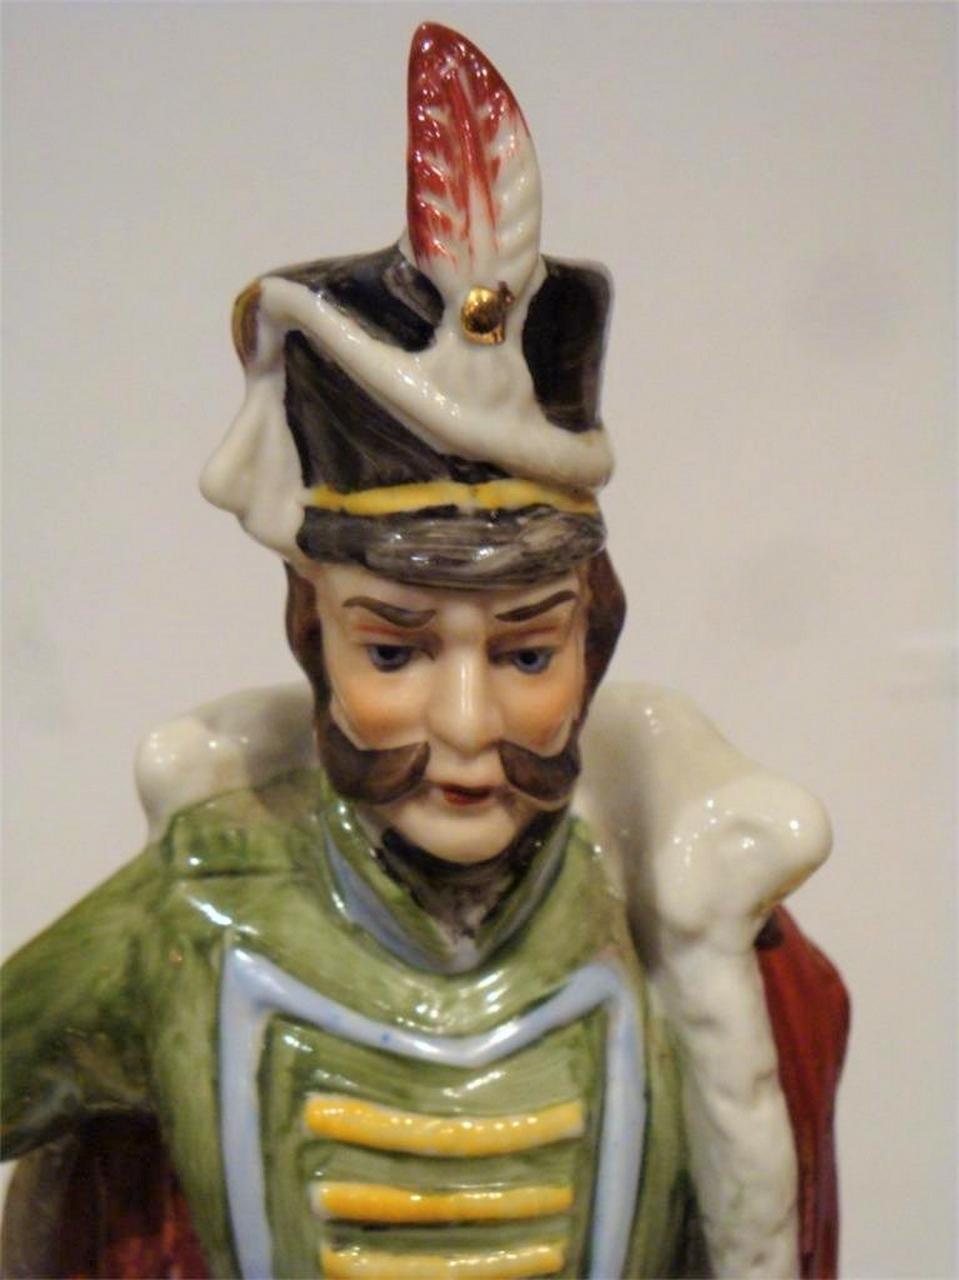 The Following Item we are offering is this Large Estate Signed Dresden Style RARE LARGE FRENCH NAPOLEON DRESDEN STYLE STANDING PORCELAIN FIGURE. Beautifully Handpainted with Fine Detail. Taken out of an Important New York City Estate. An Absolute